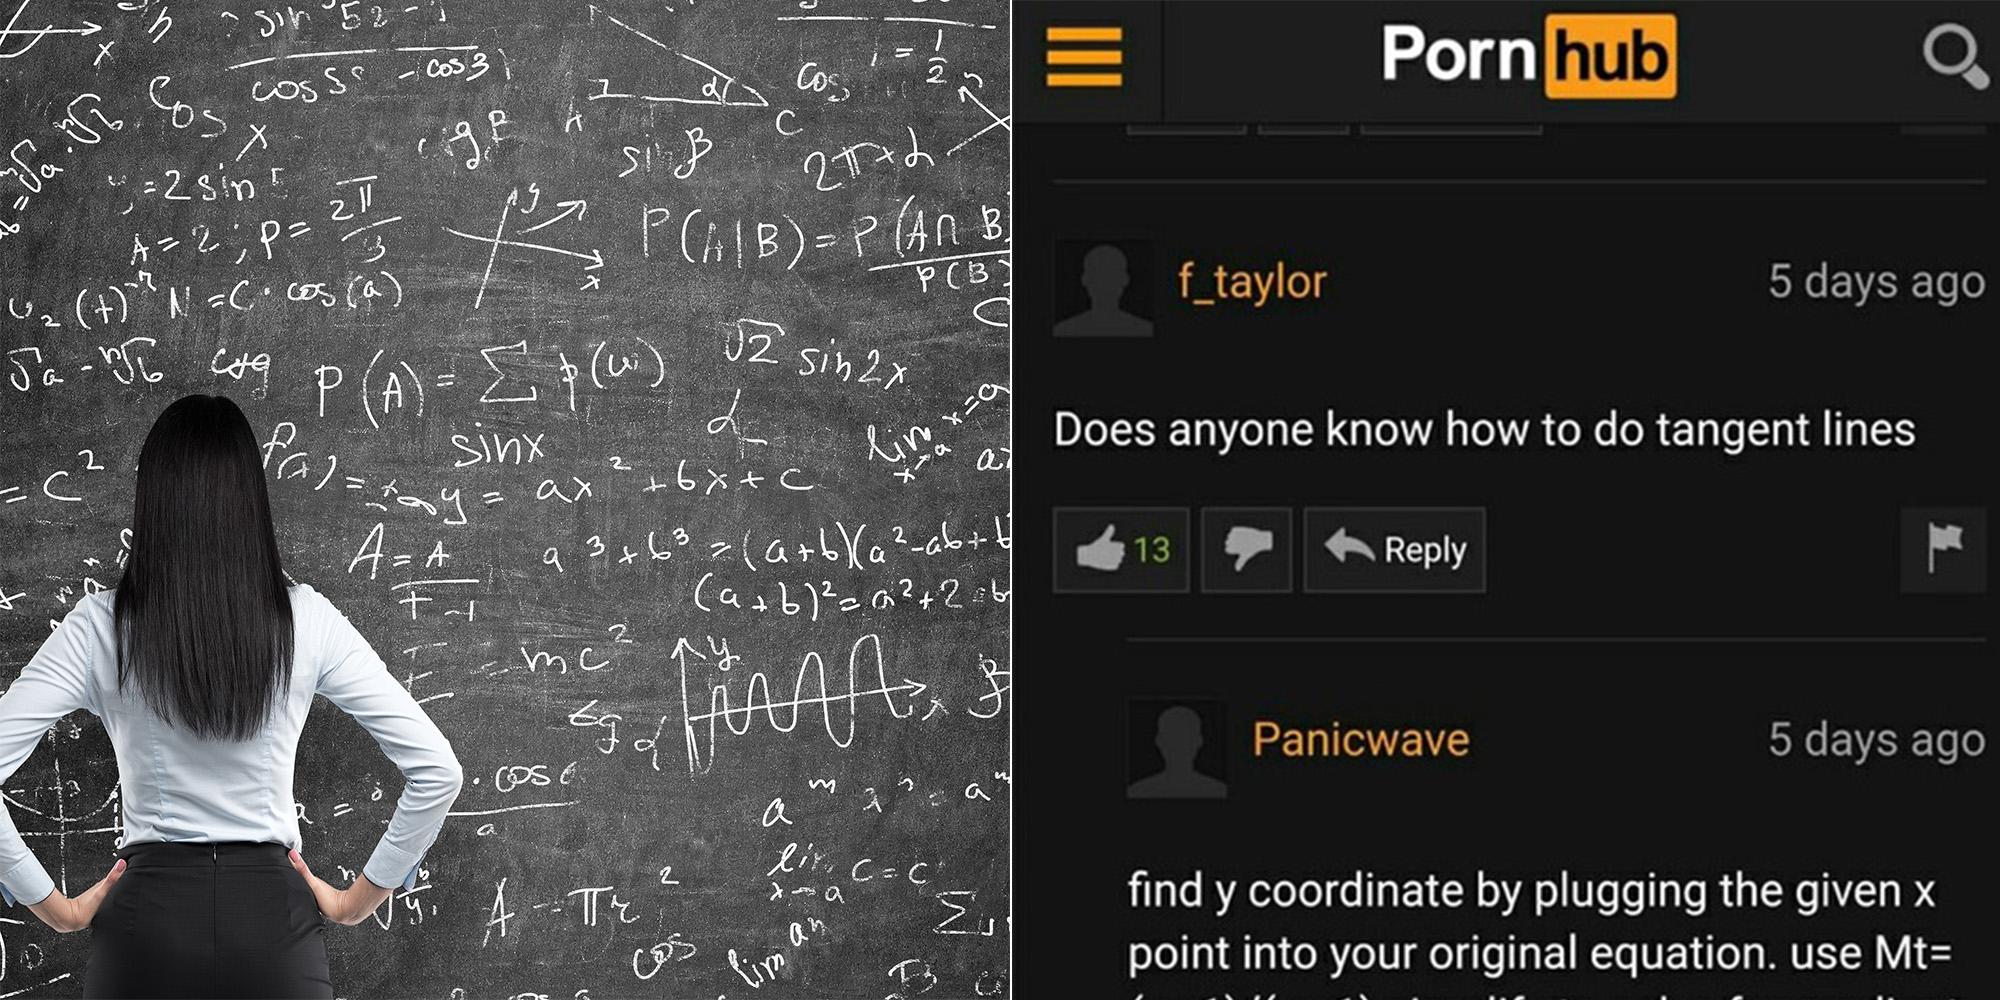 Someone asked Pornhub commenters for maths help – and they actually